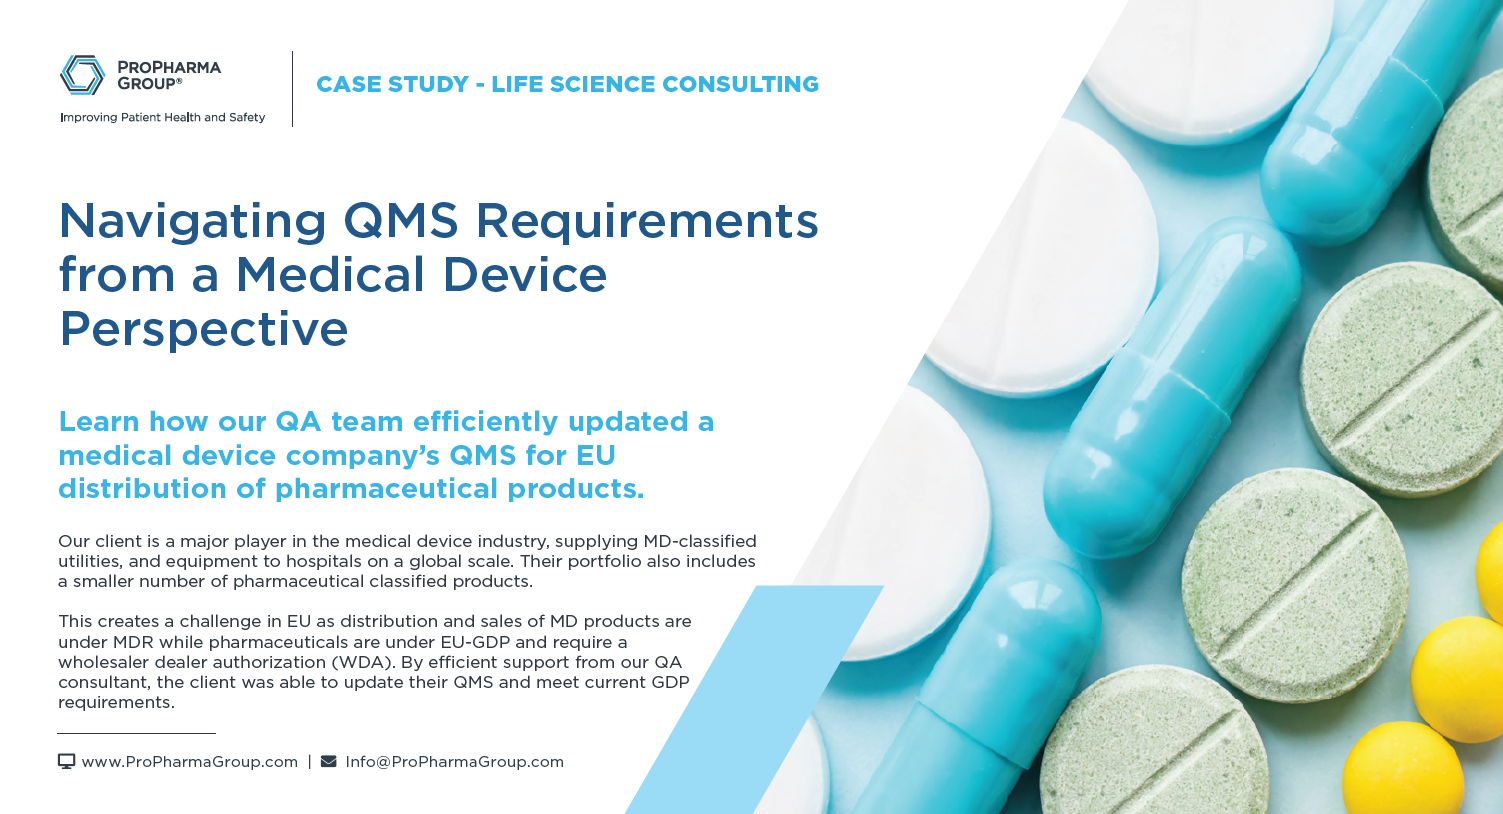 Navigating QMS Requirements from a Medical Device Perspective